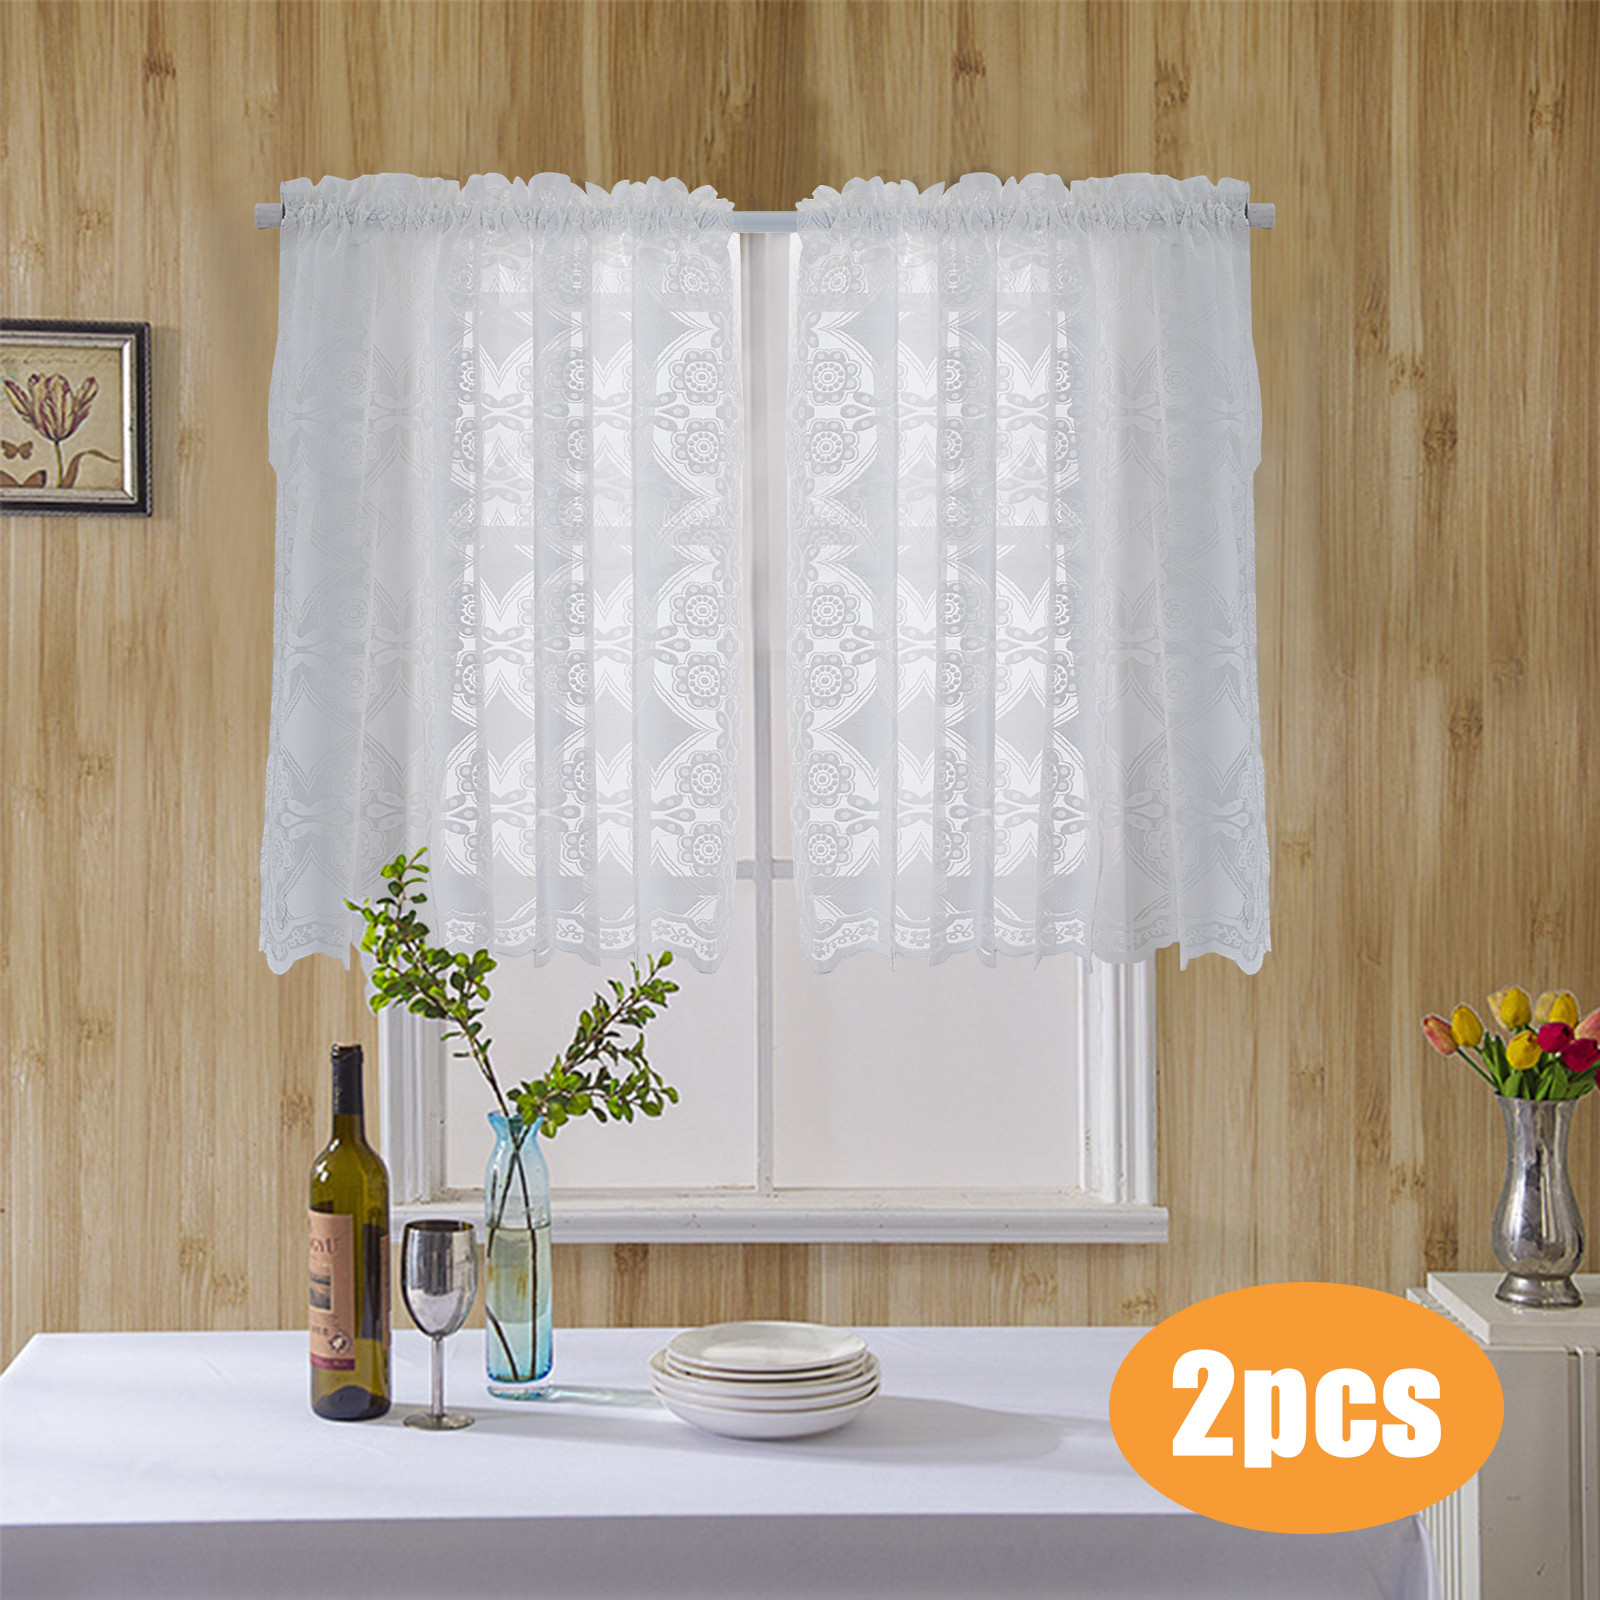 Lace Kitchen Curtain
 TSV 2 Tier White Lace Kitchen Curtain Floral Lace Sheer